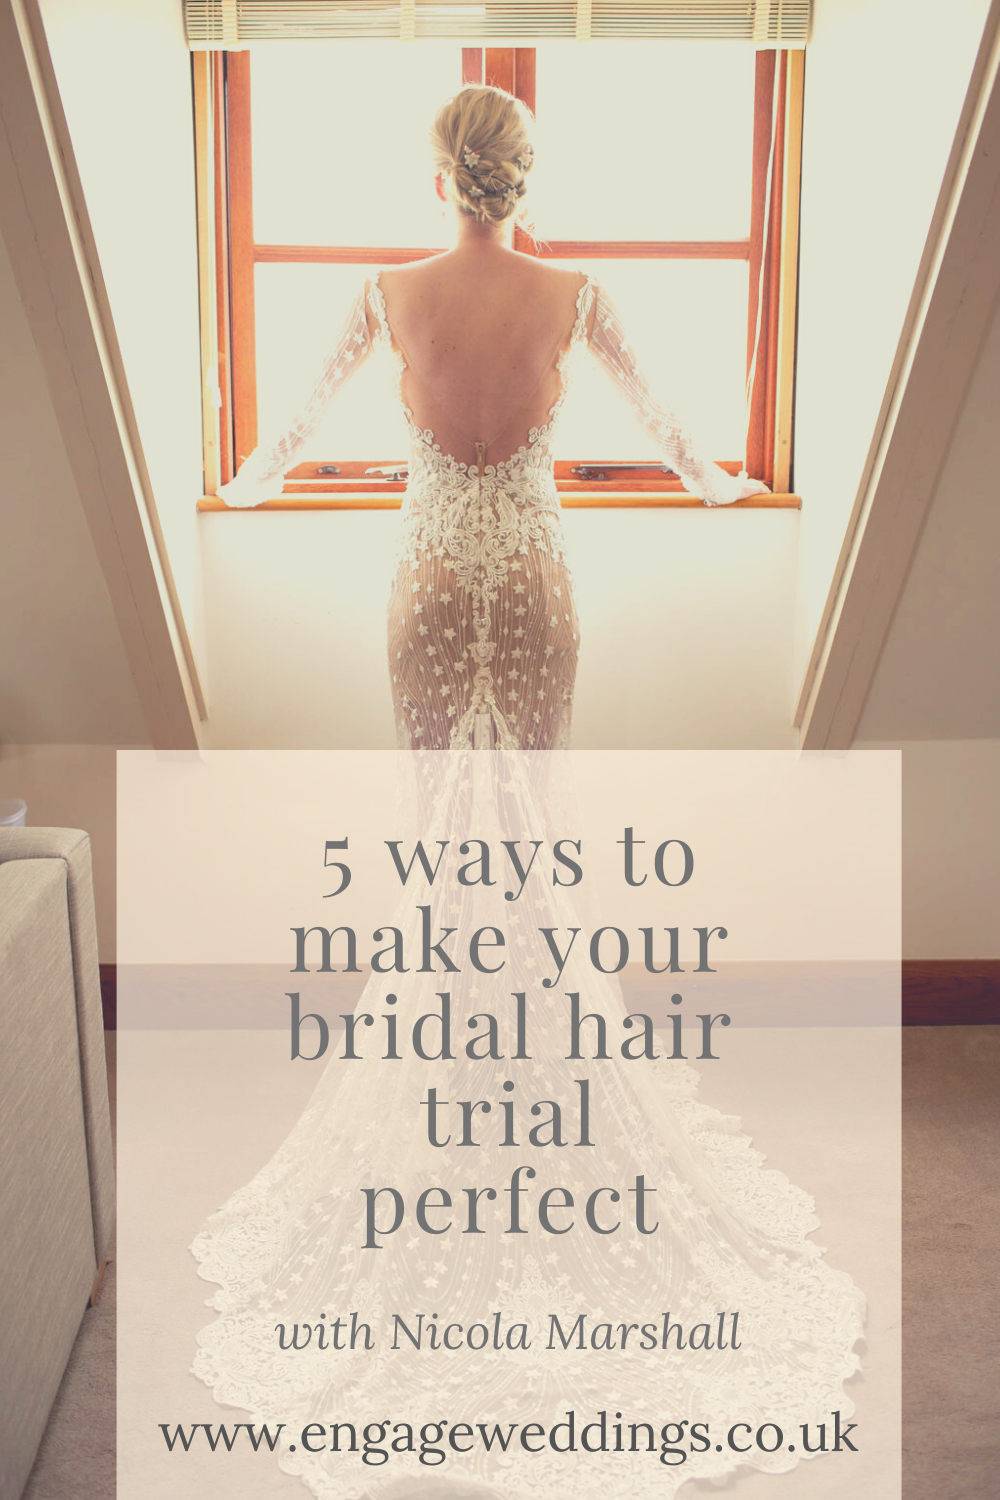 5 ways to make your bridal hair trial perfect_engageweddings.co.uk